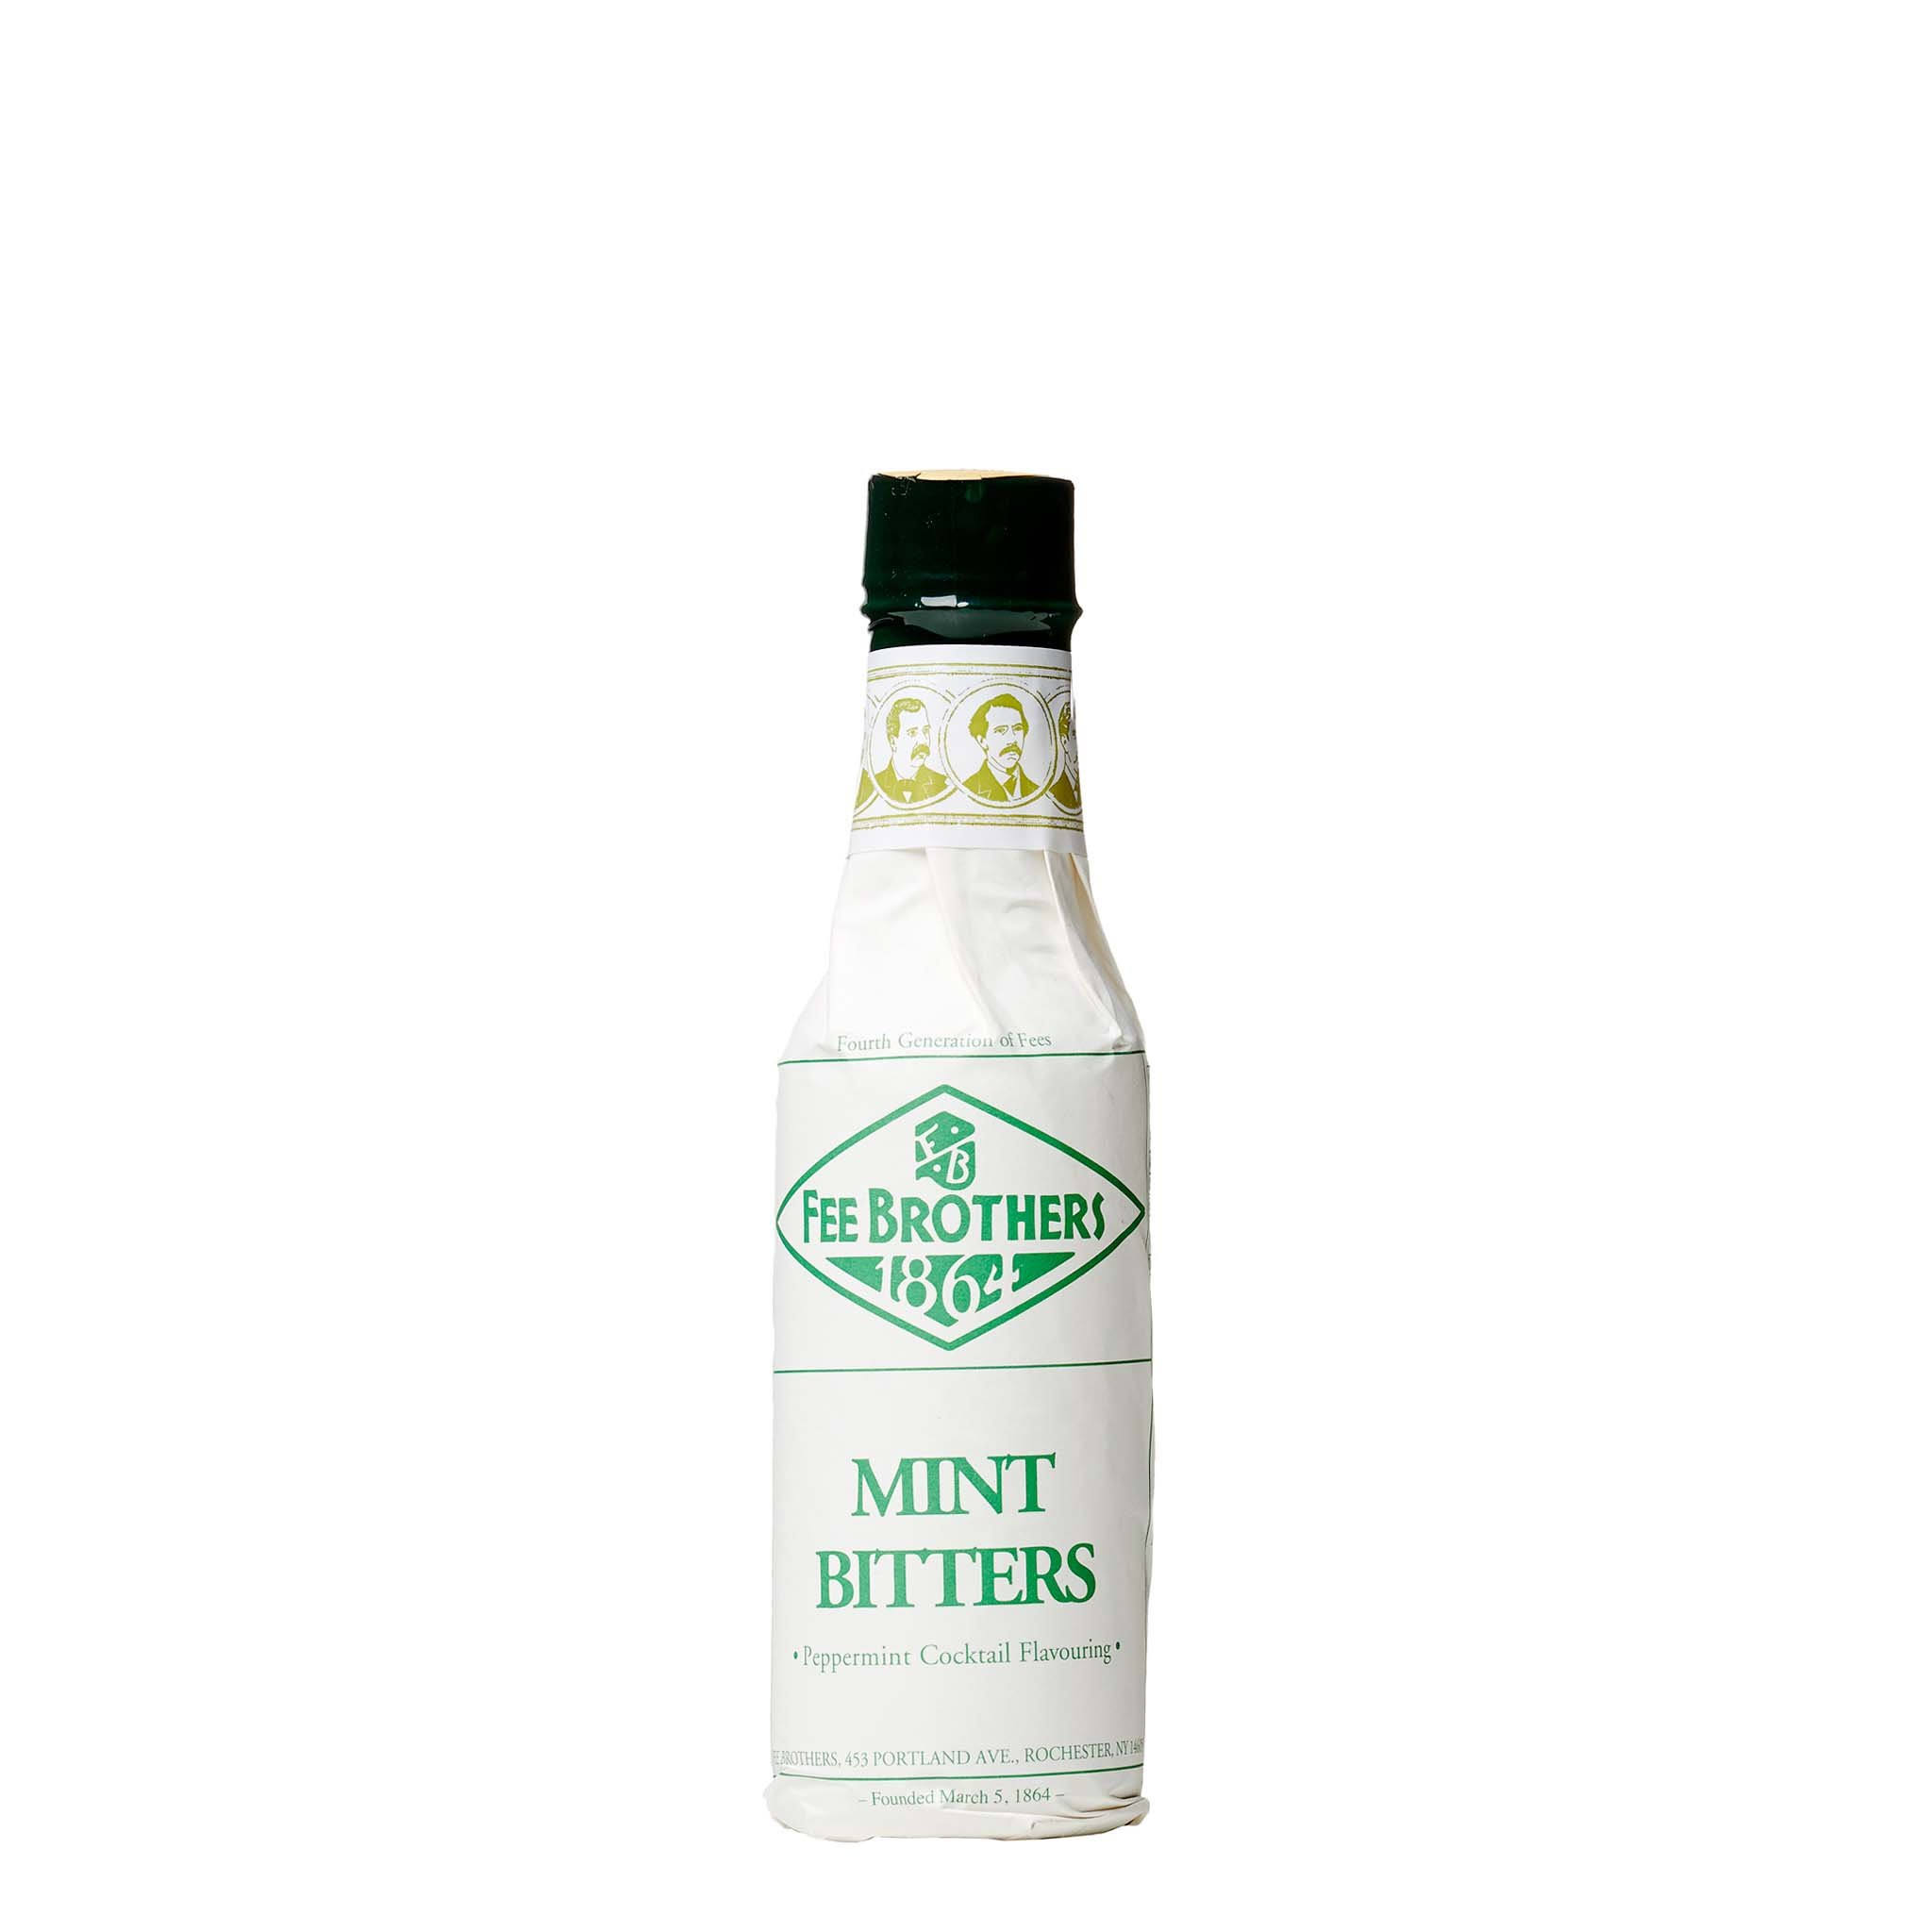 Fee Brothers Mint Bitters - Peppermint